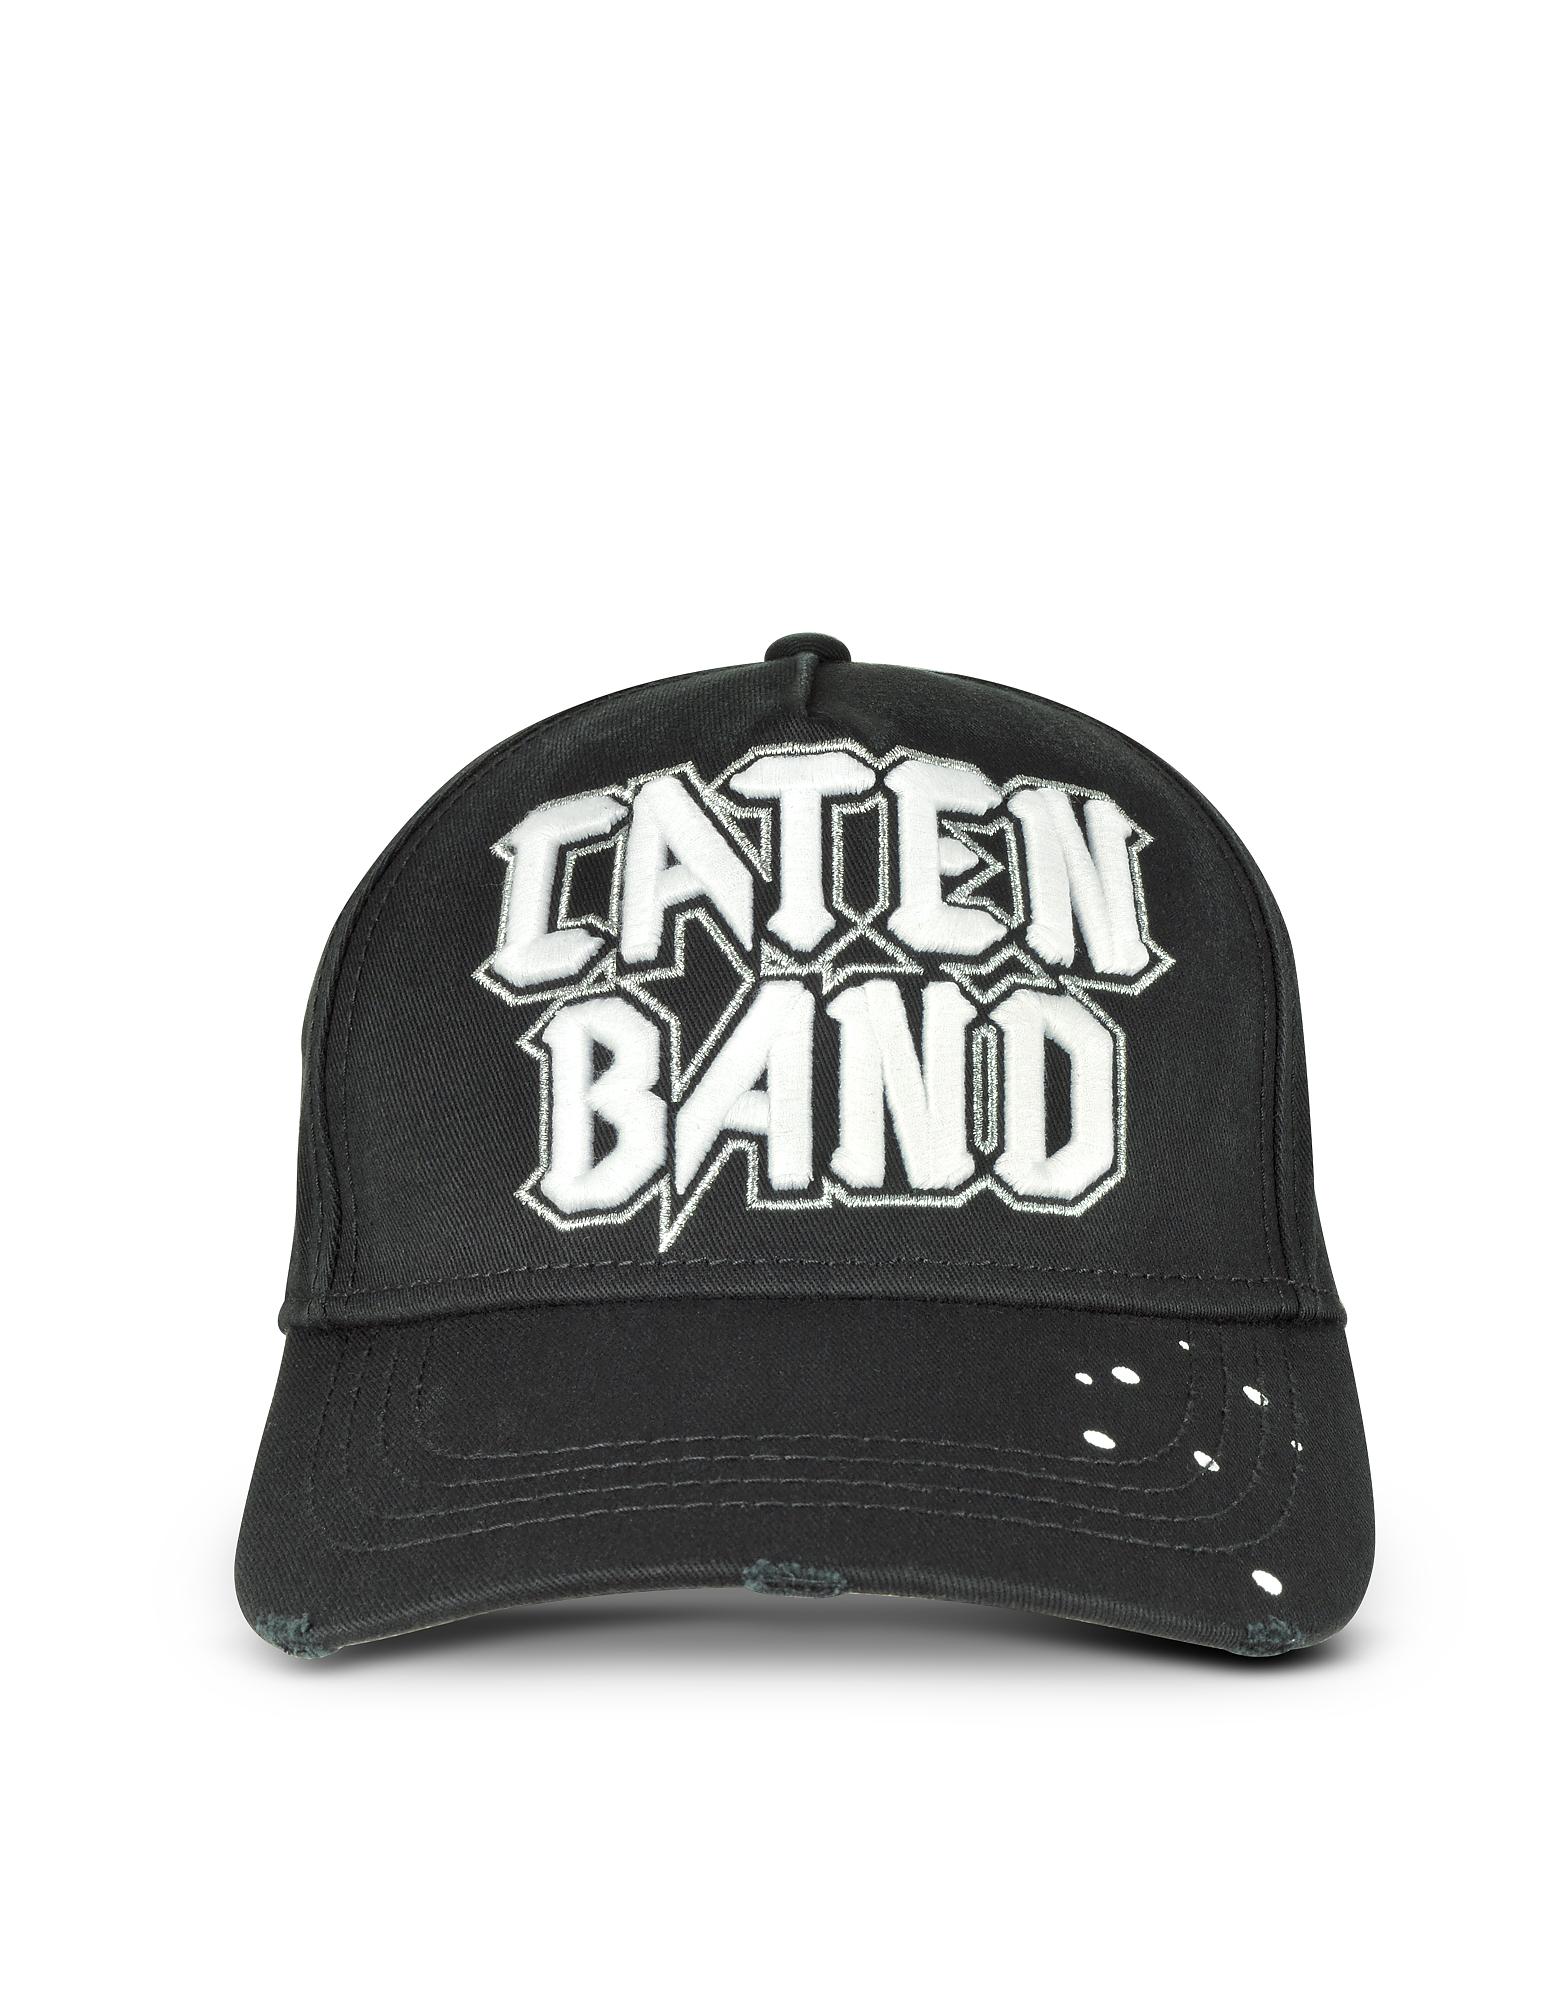 caten band hat